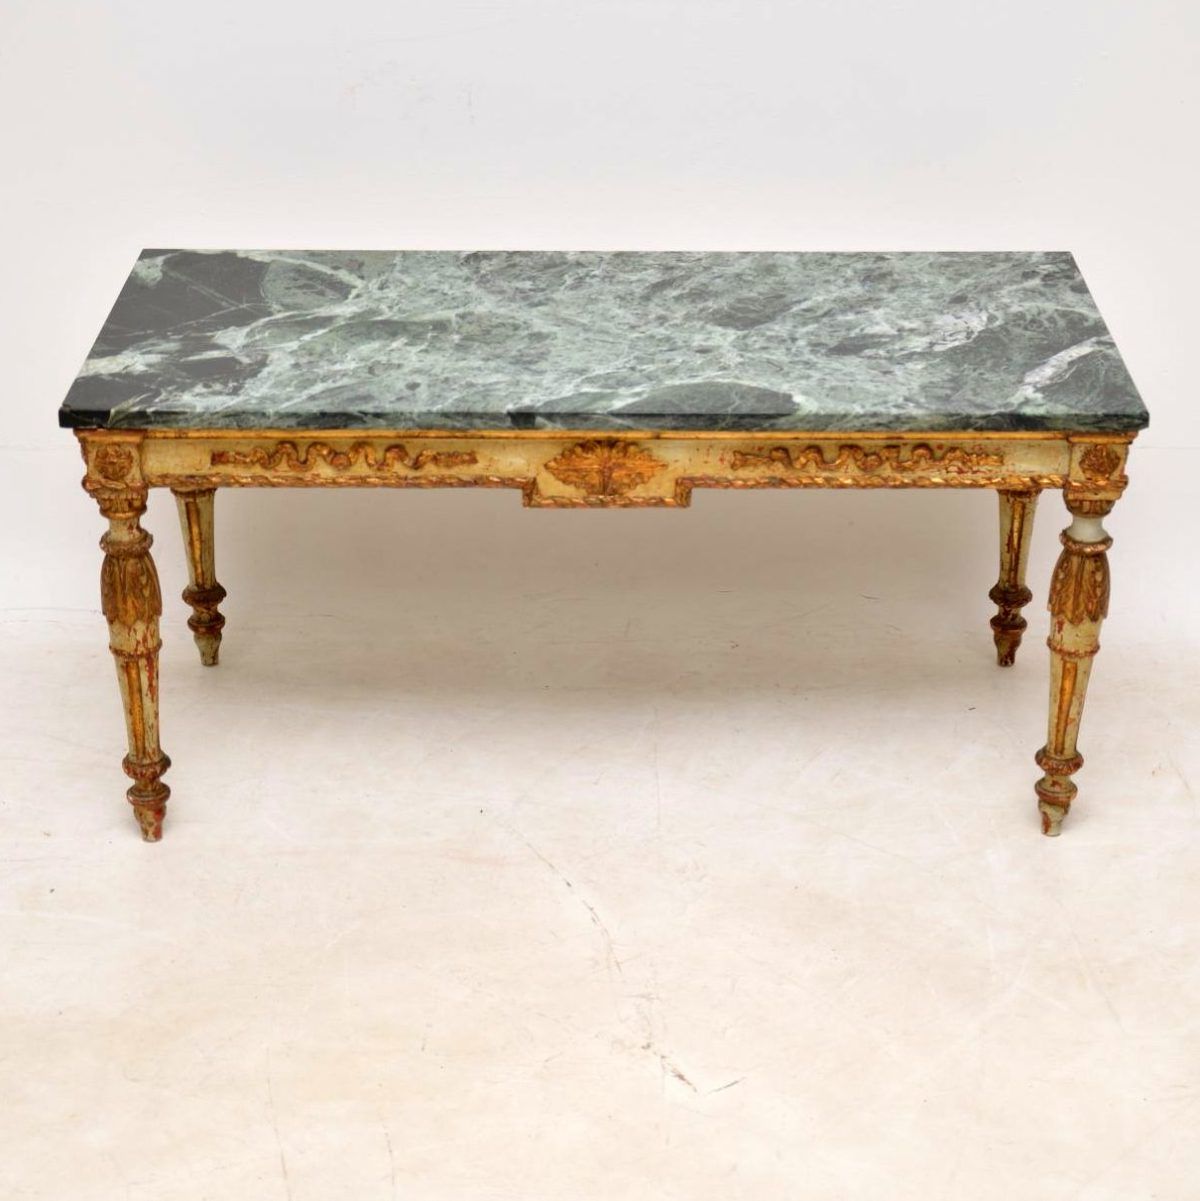 Antique French Marble Top Coffee Table – Marylebone Antiques Inside Most Recent Marble Top Coffee Tables (Gallery 20 of 20)